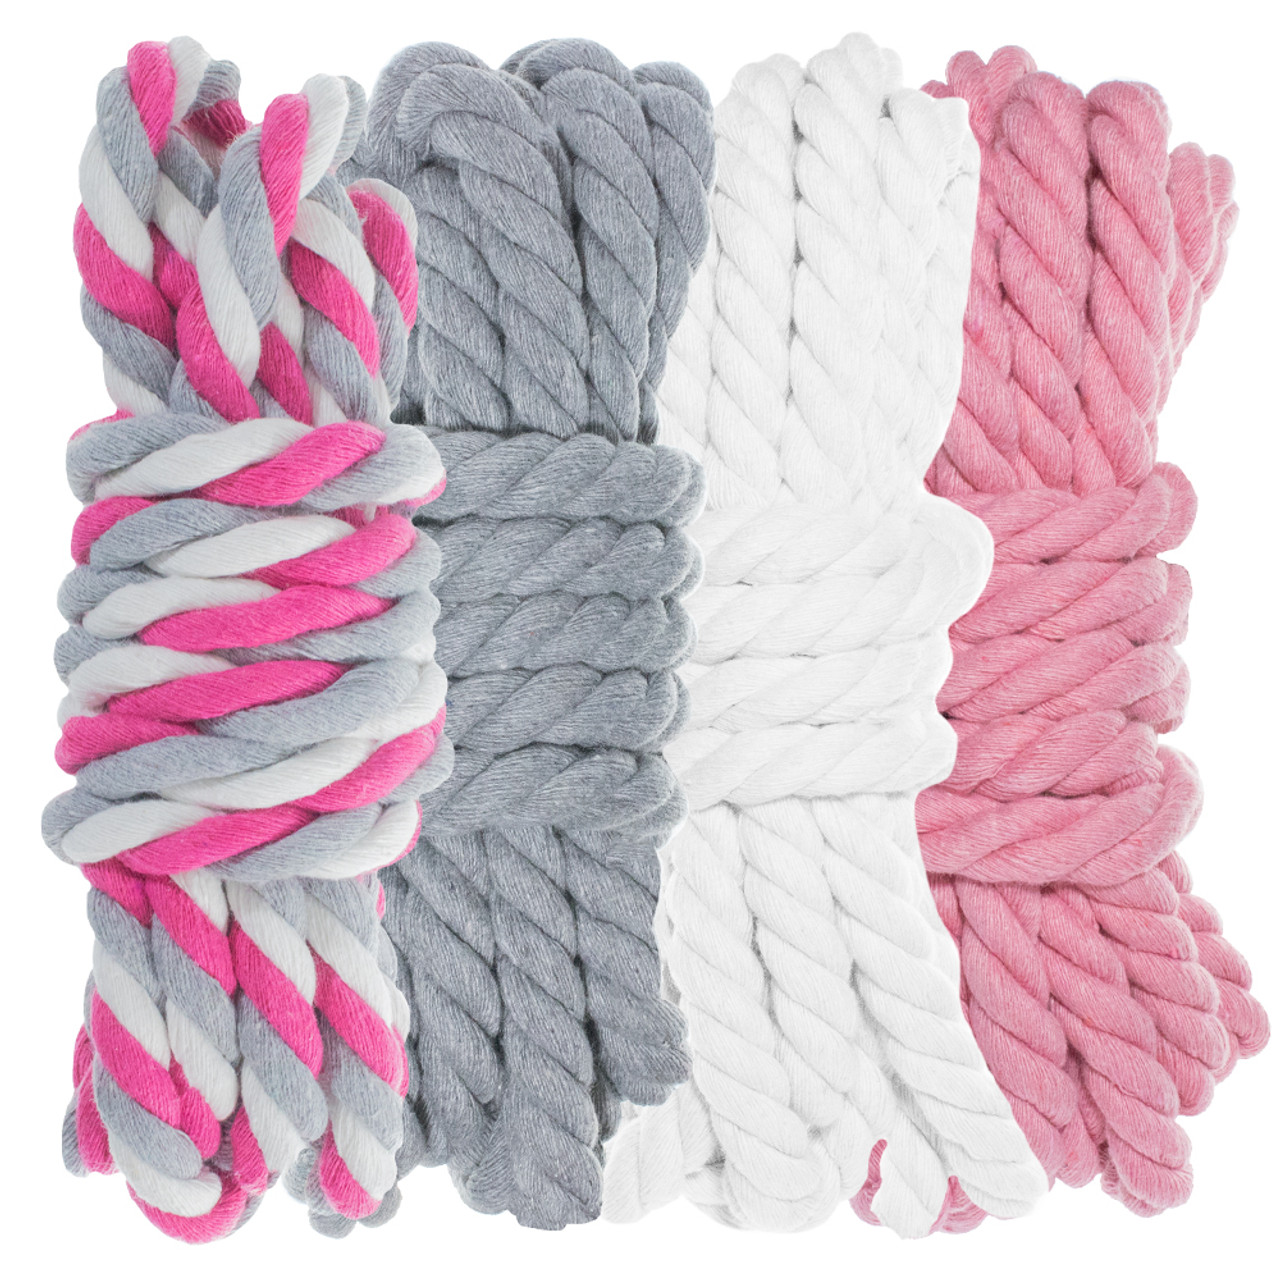 3-Strand 1/2 inch Twisted Cotton Rope - Multiple Colors